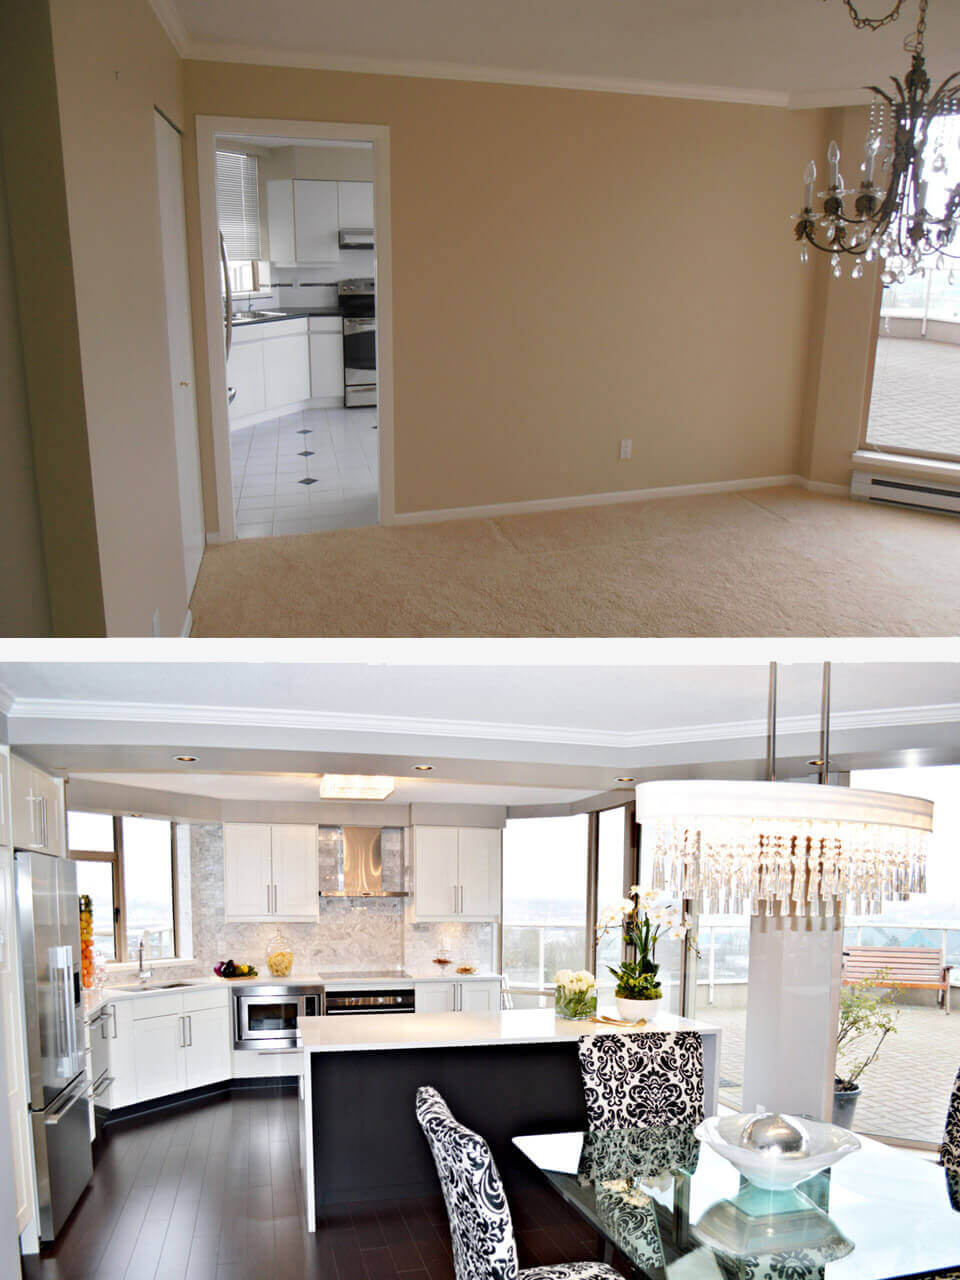 Before and After Kitchen Renovation - renovateme! North Vancouver